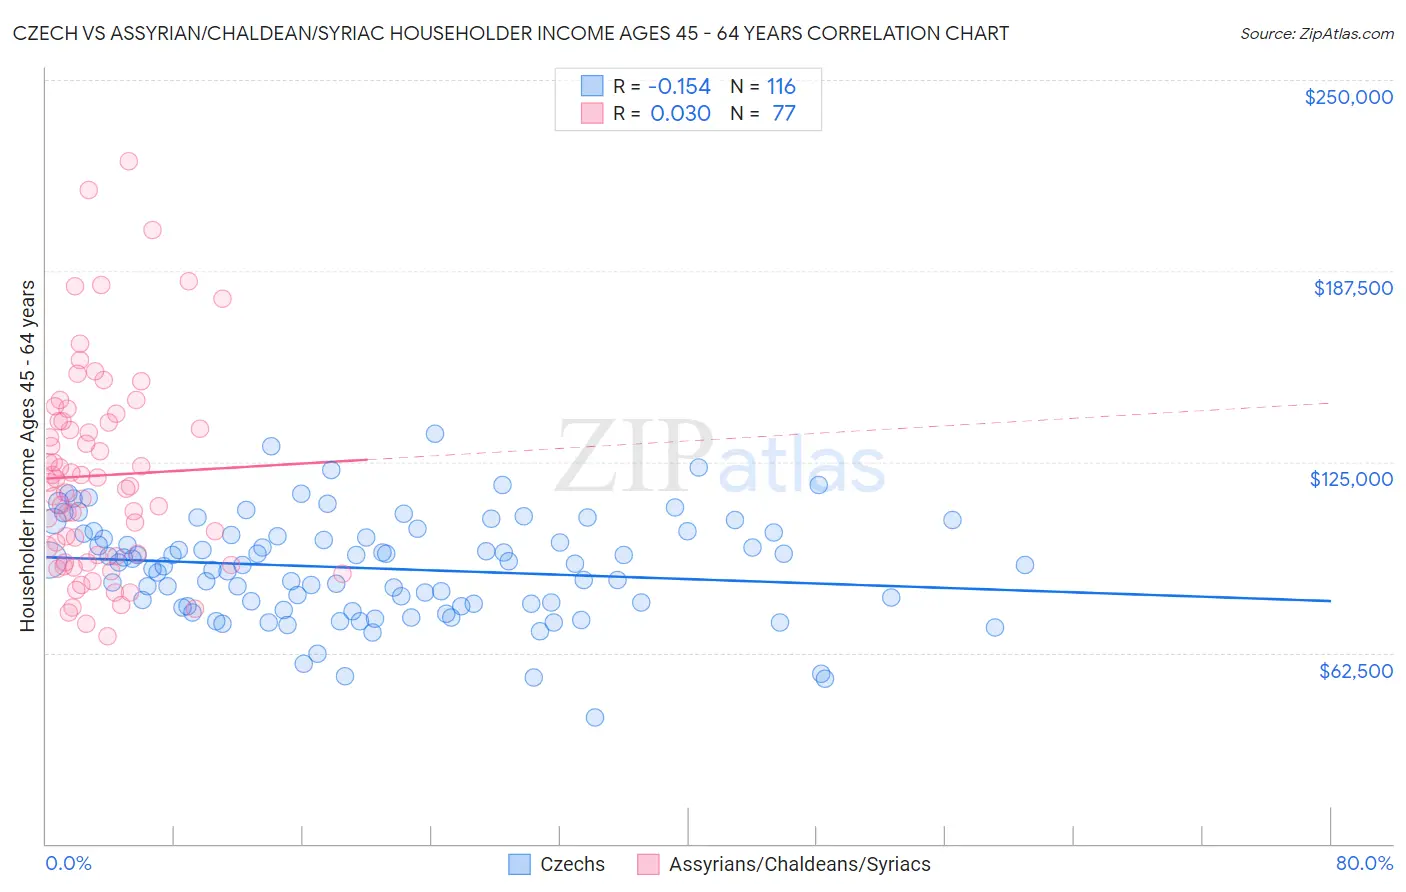 Czech vs Assyrian/Chaldean/Syriac Householder Income Ages 45 - 64 years